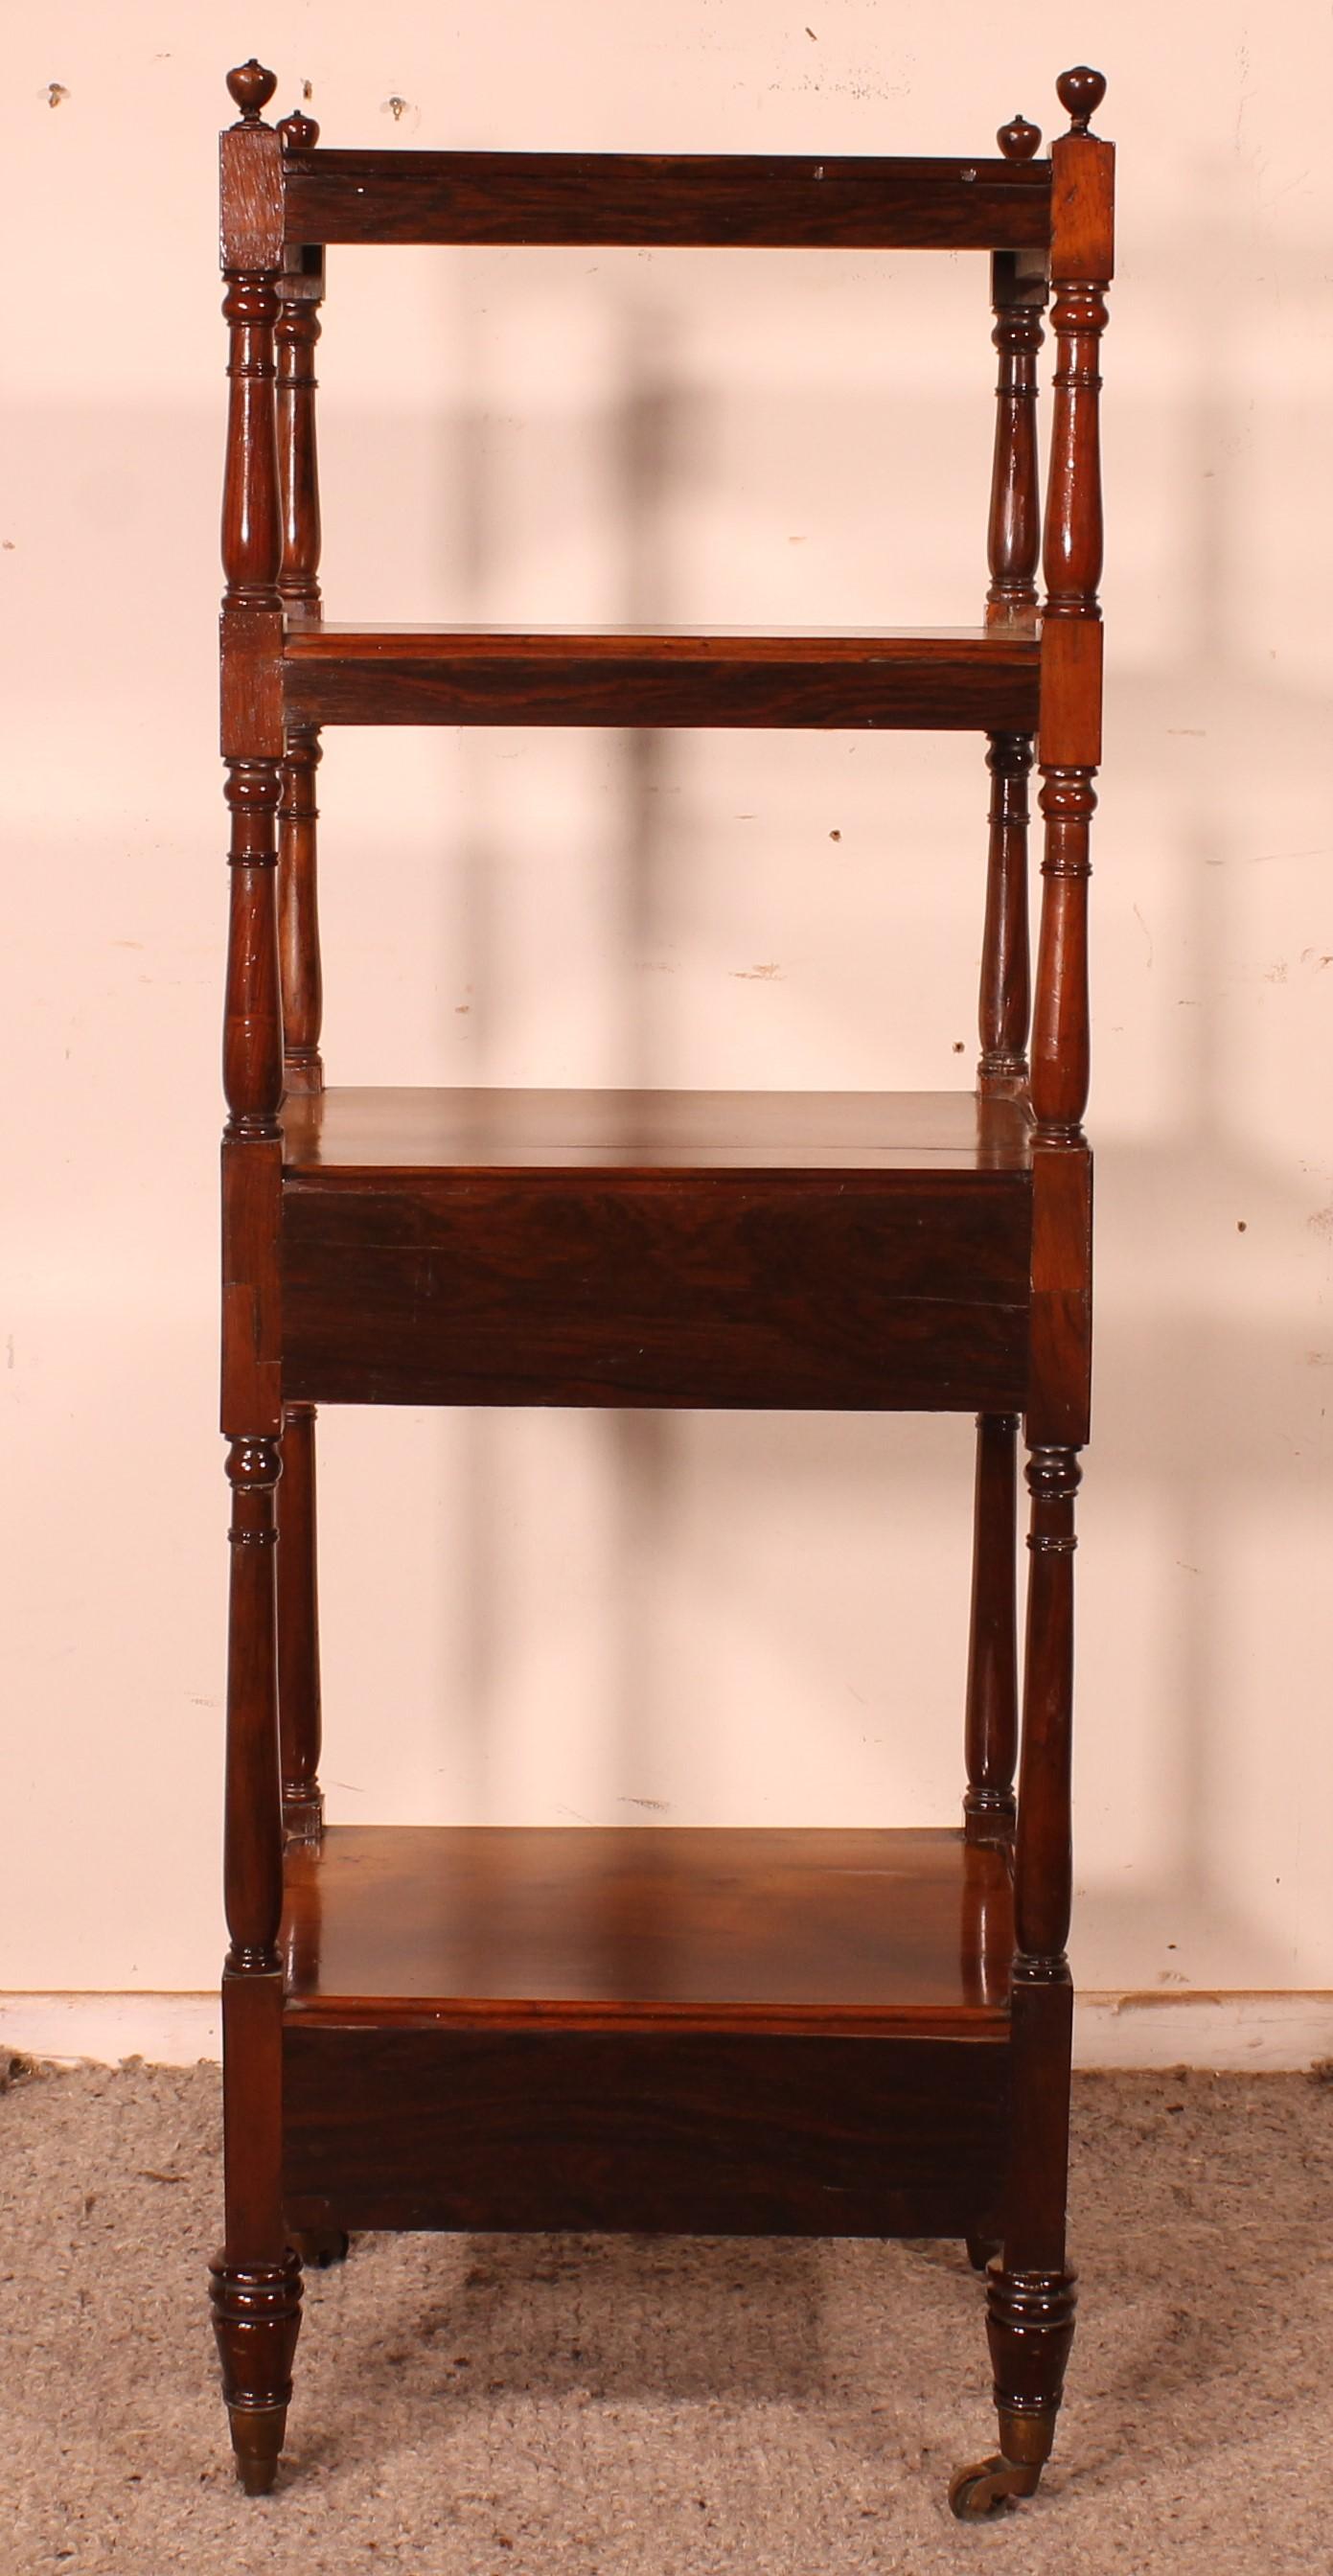 Rosewood Whatnot Or Shelf From 19th Century - England 3